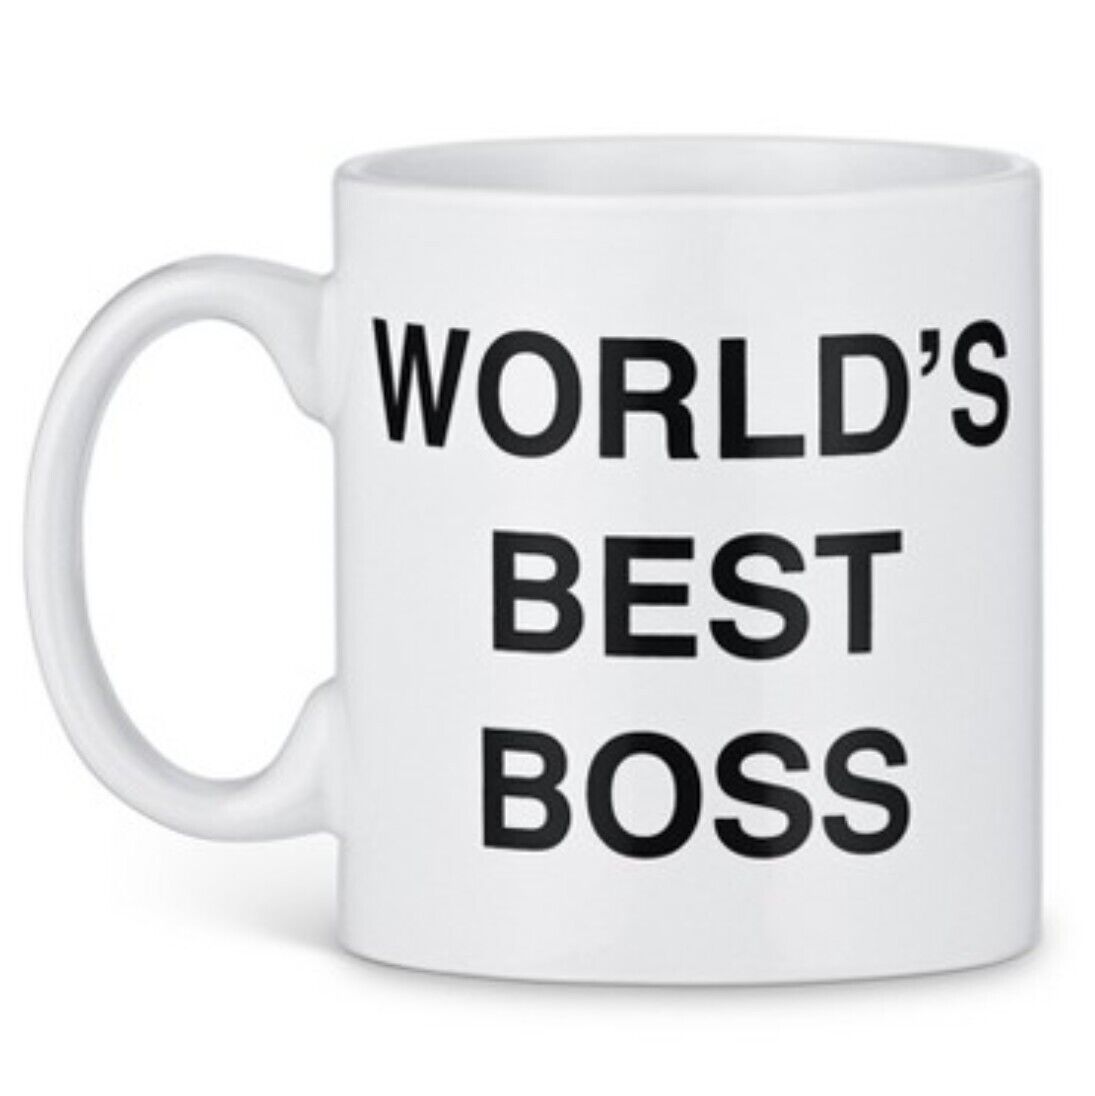 World's Best Boss - Office Gift Coffee Cup - 11oz or 15oz Mug